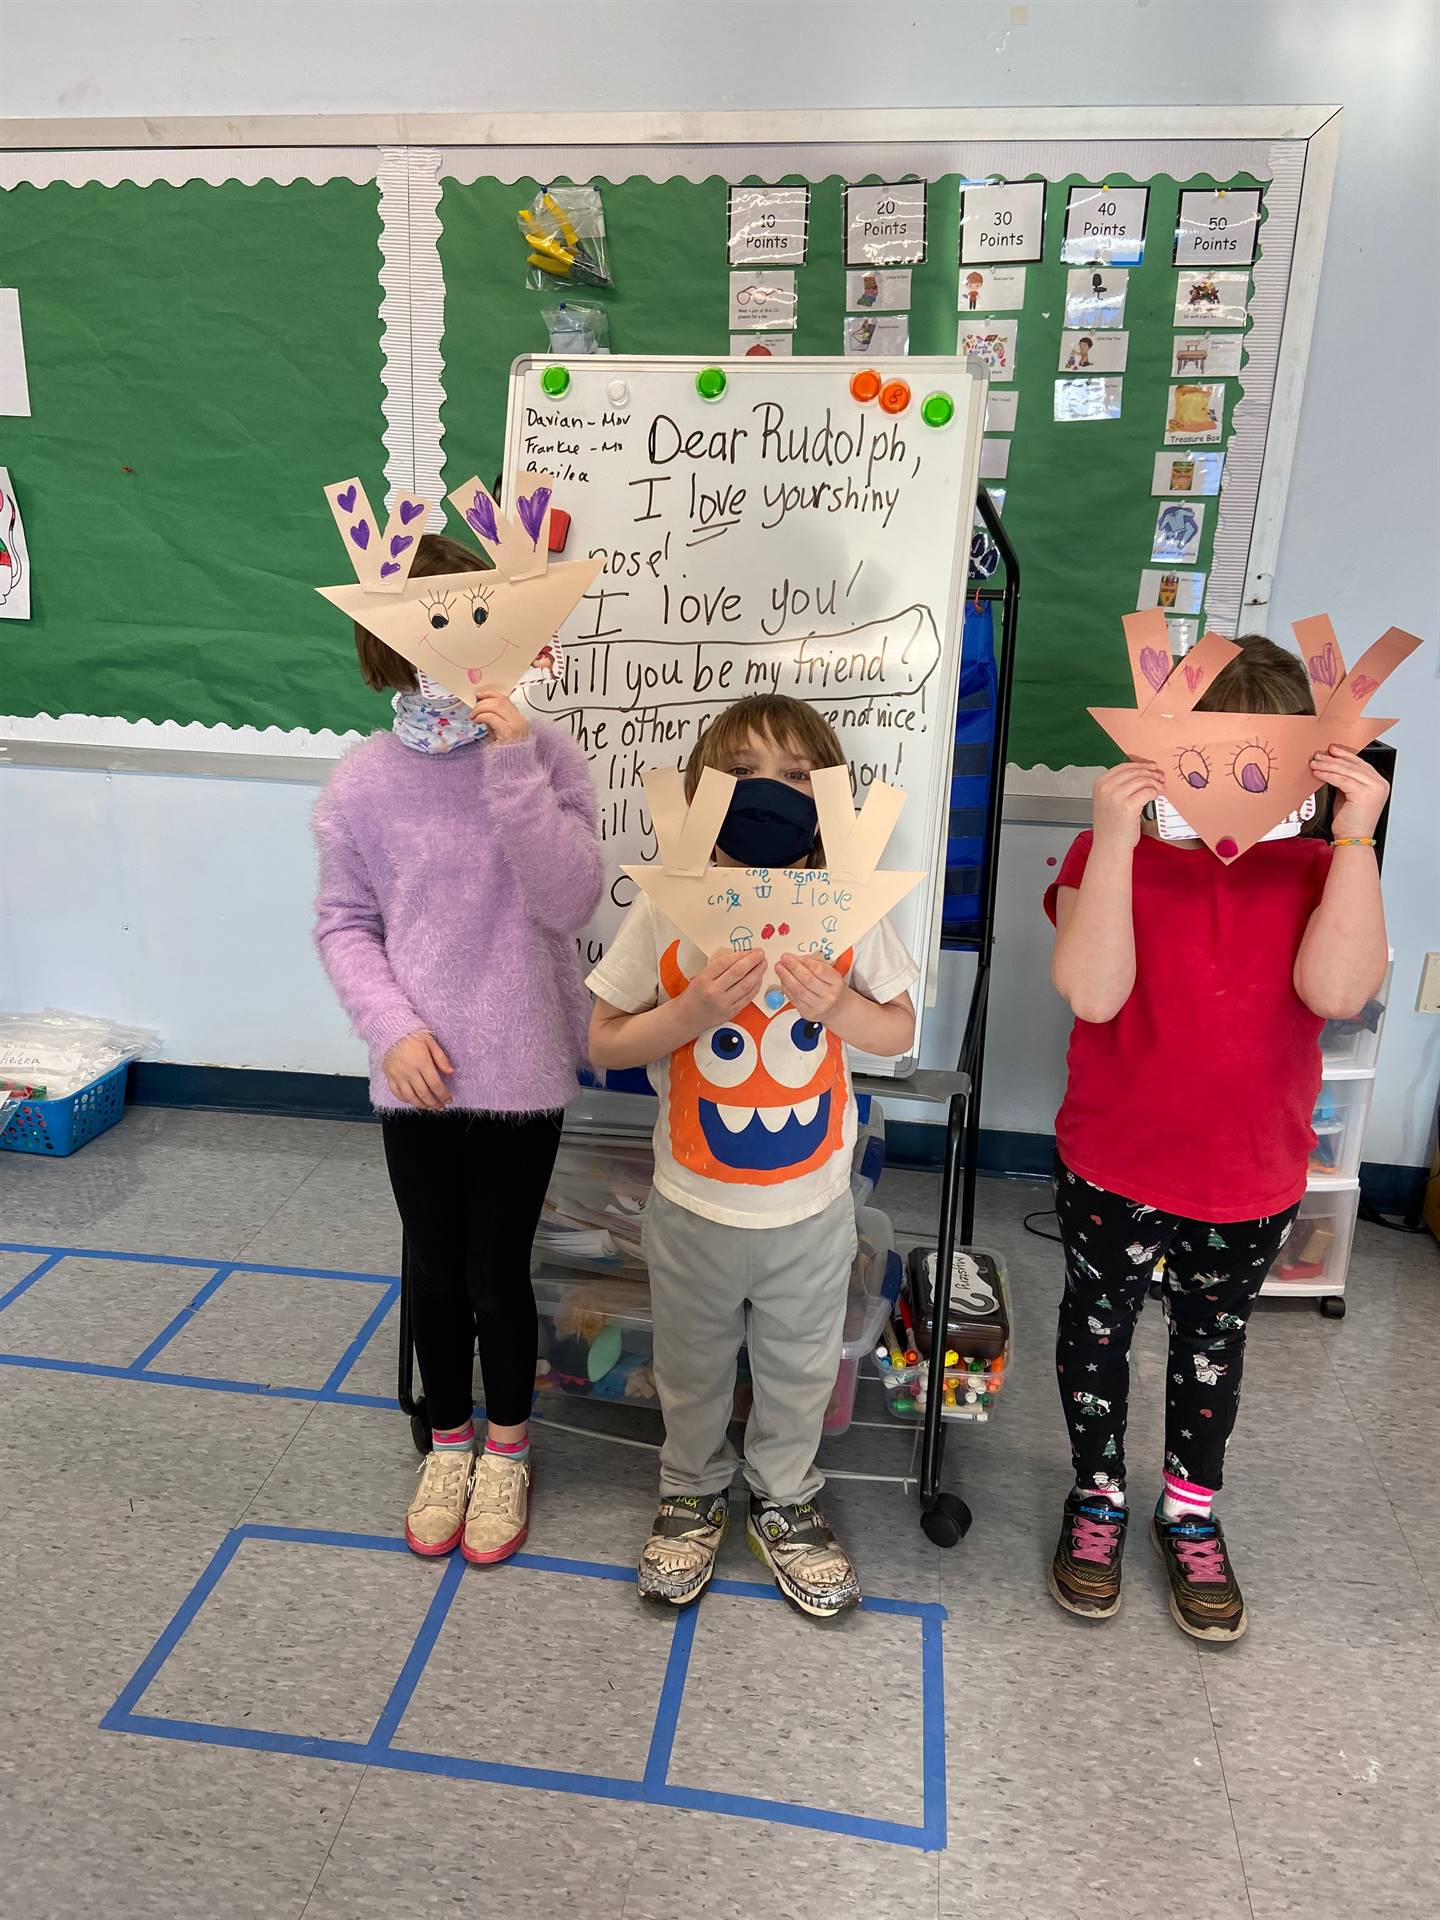 3 students holding paper reindeer heads in front of faces with letter to rudolph  in background 